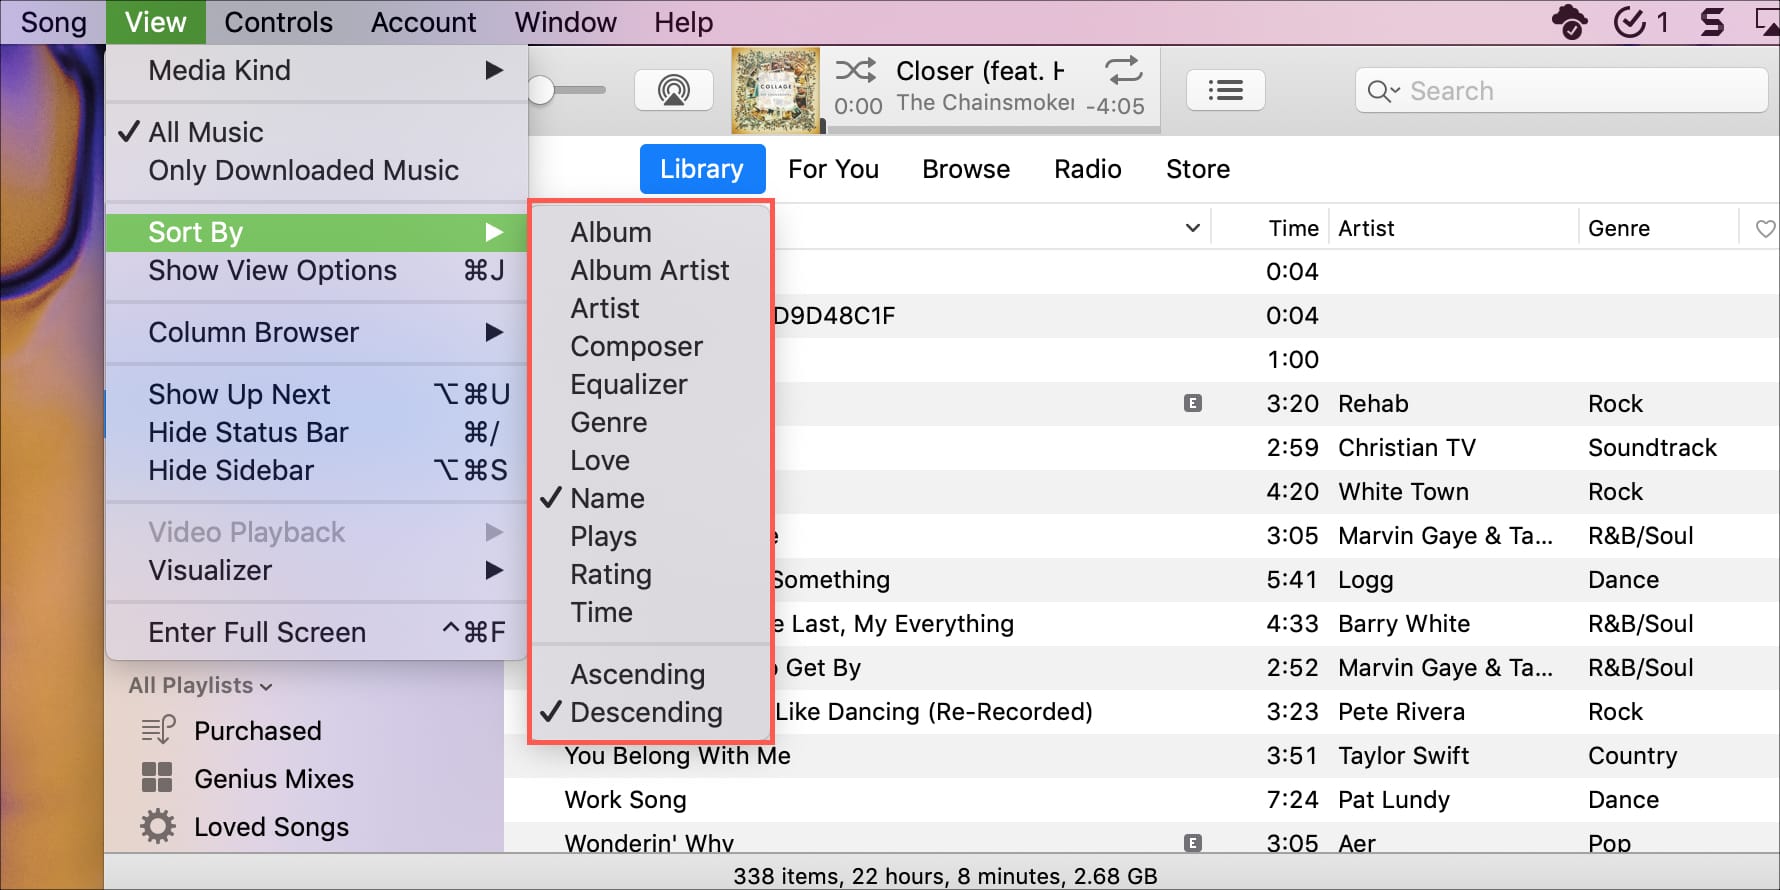 Sort Order for Songs in Music Library